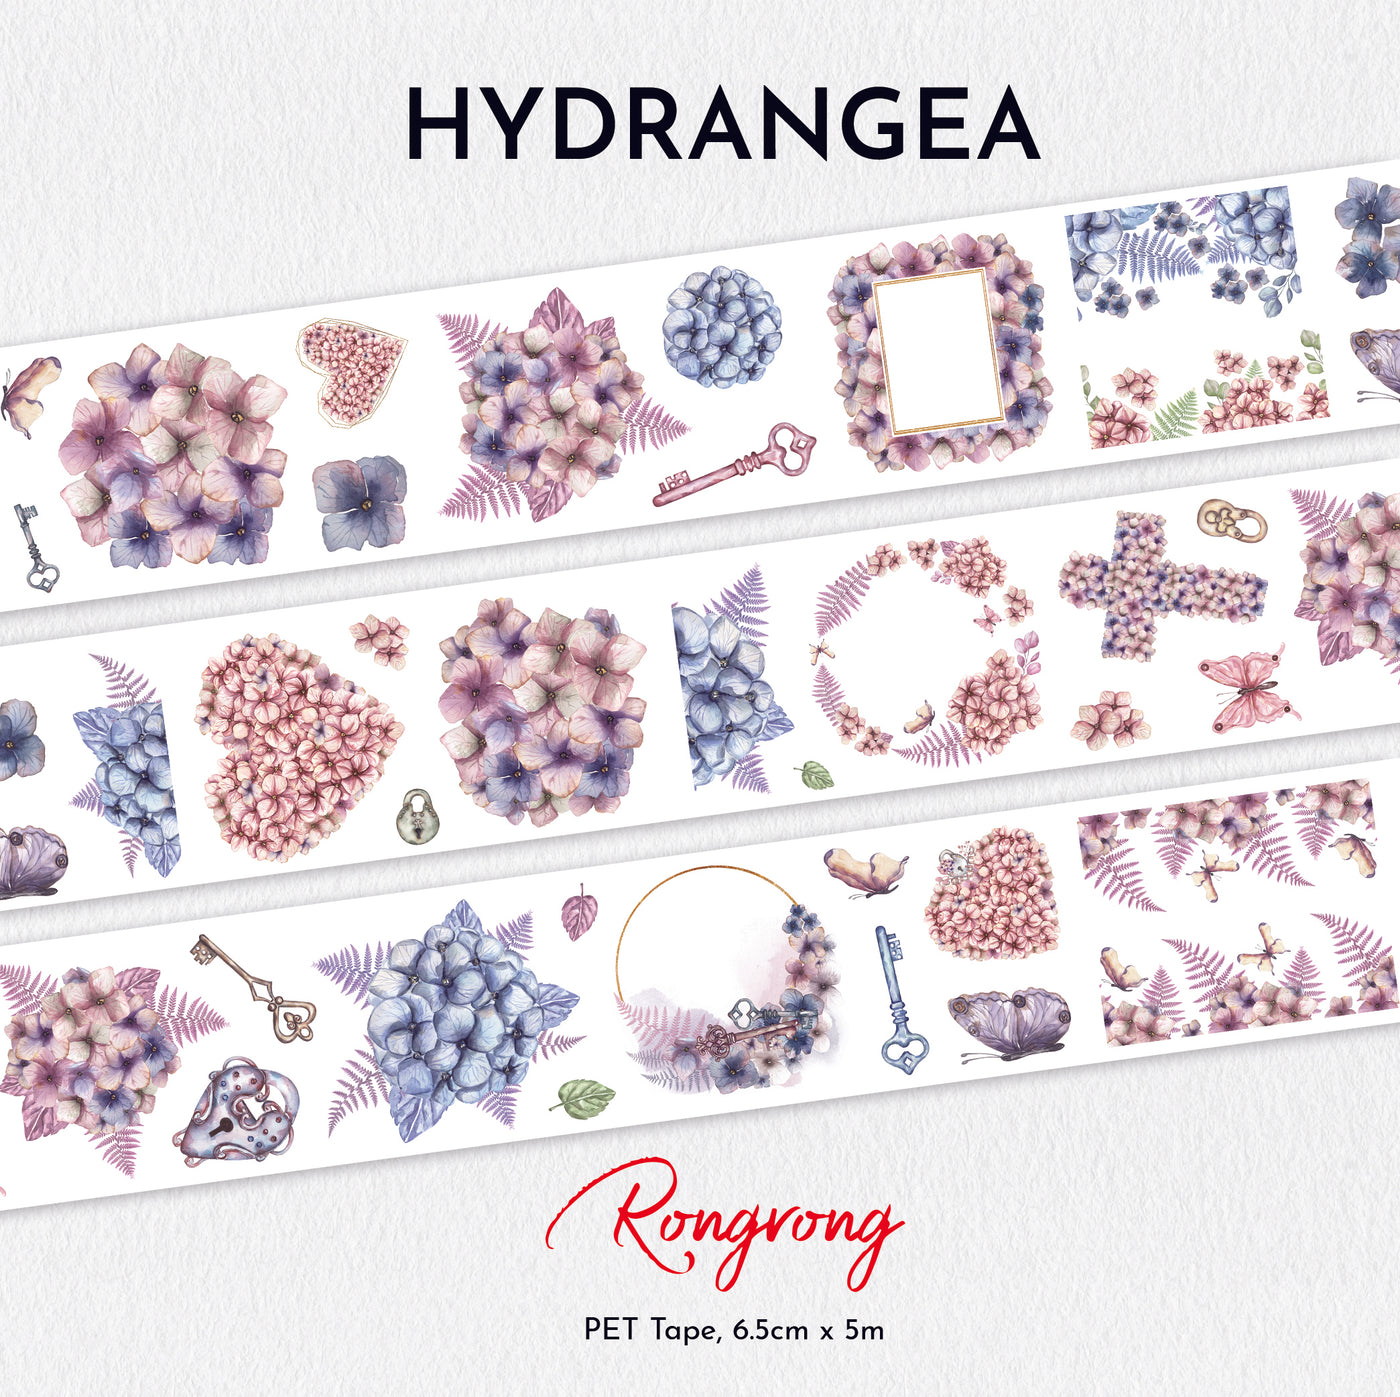 Shop Rongrong Hydrangrea Pet Tape for Planner